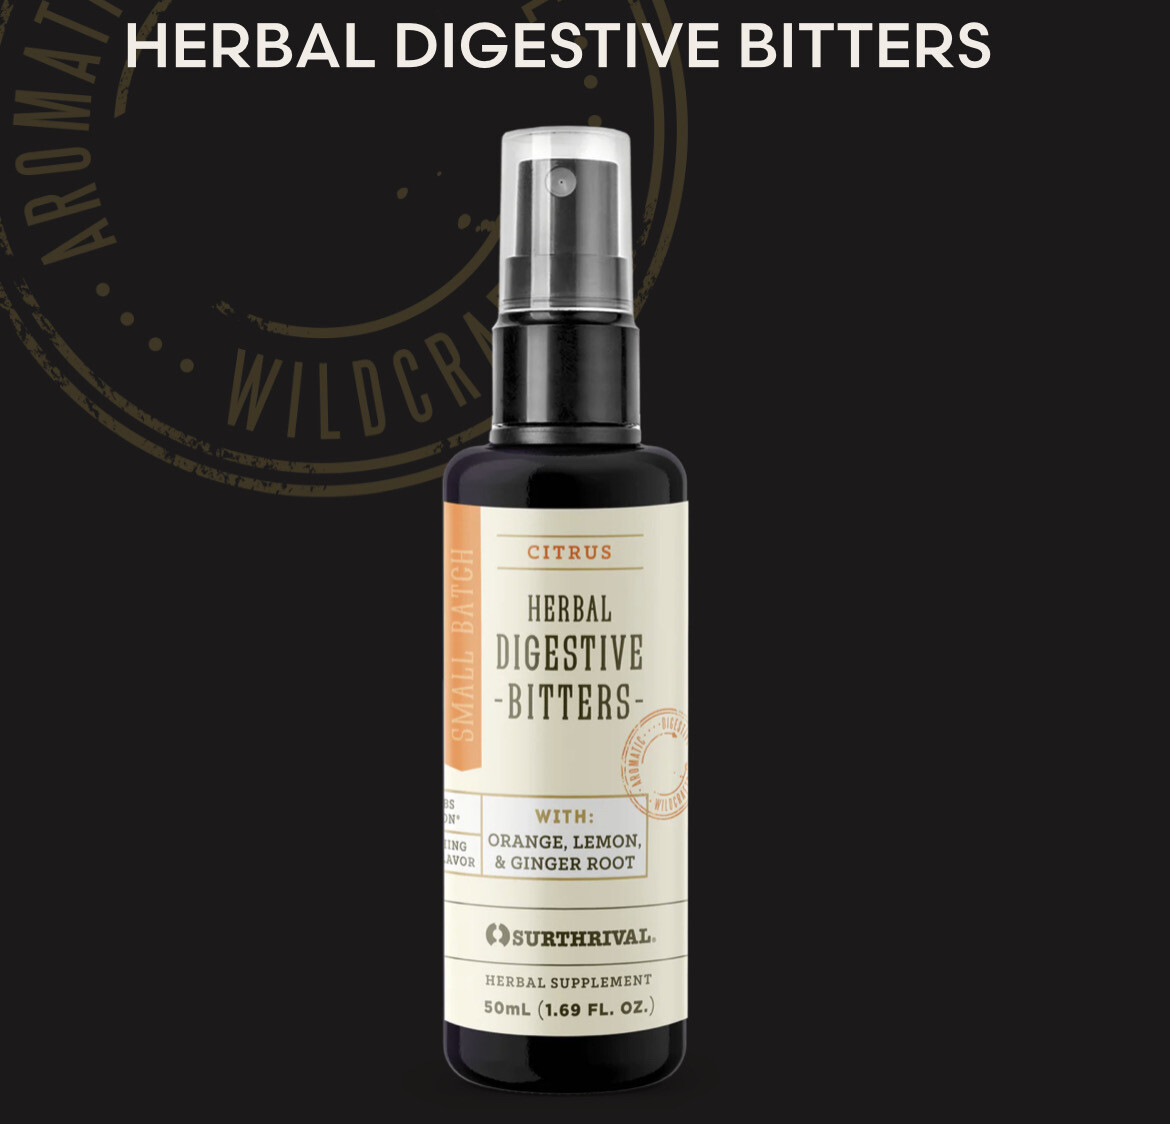 Surthrival Herbal Digestive Bitters 50ml